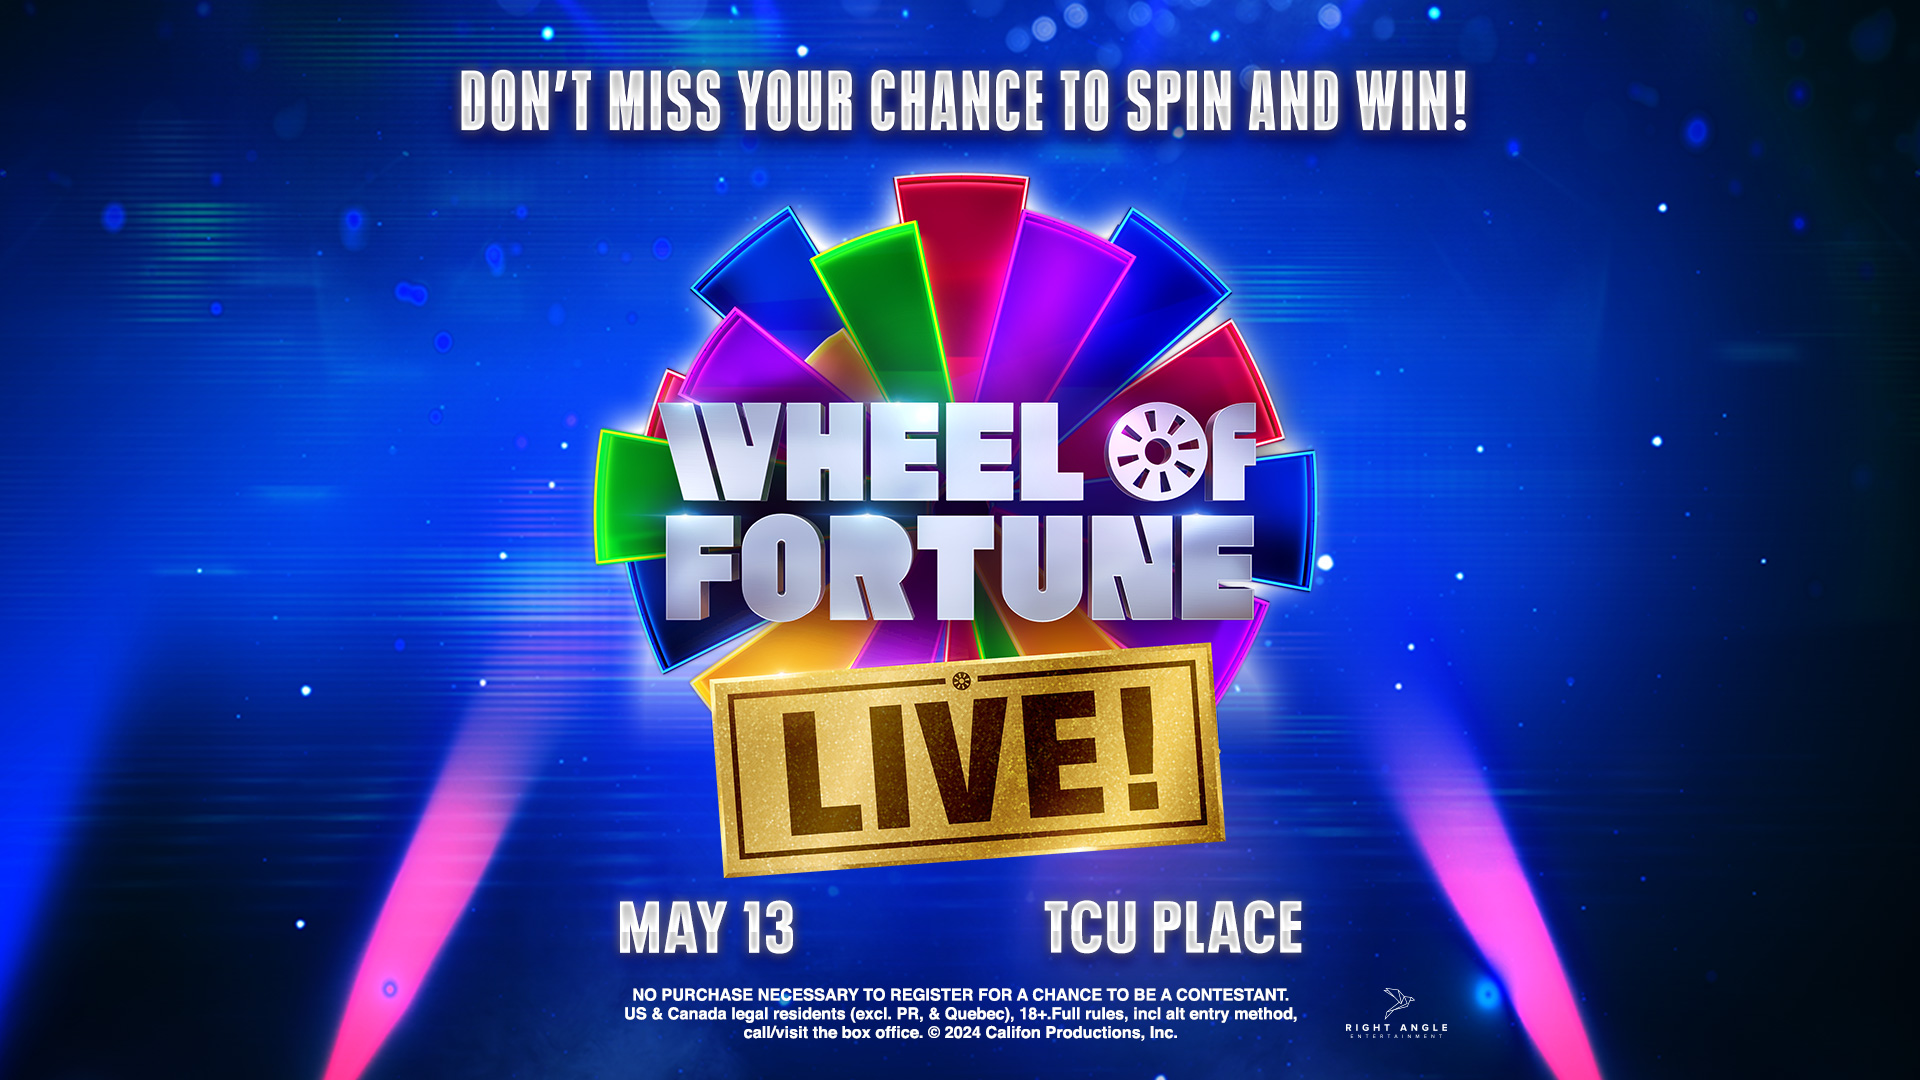 Wheel of Fortune LIVE! One of the greatest game shows of all time has been adapted into a stage show to give more fans access and more chances to win at “Wheel of Fortune LIVE!” Guests are randomly selected to go on stage and feel like they stepped into the game show itself.